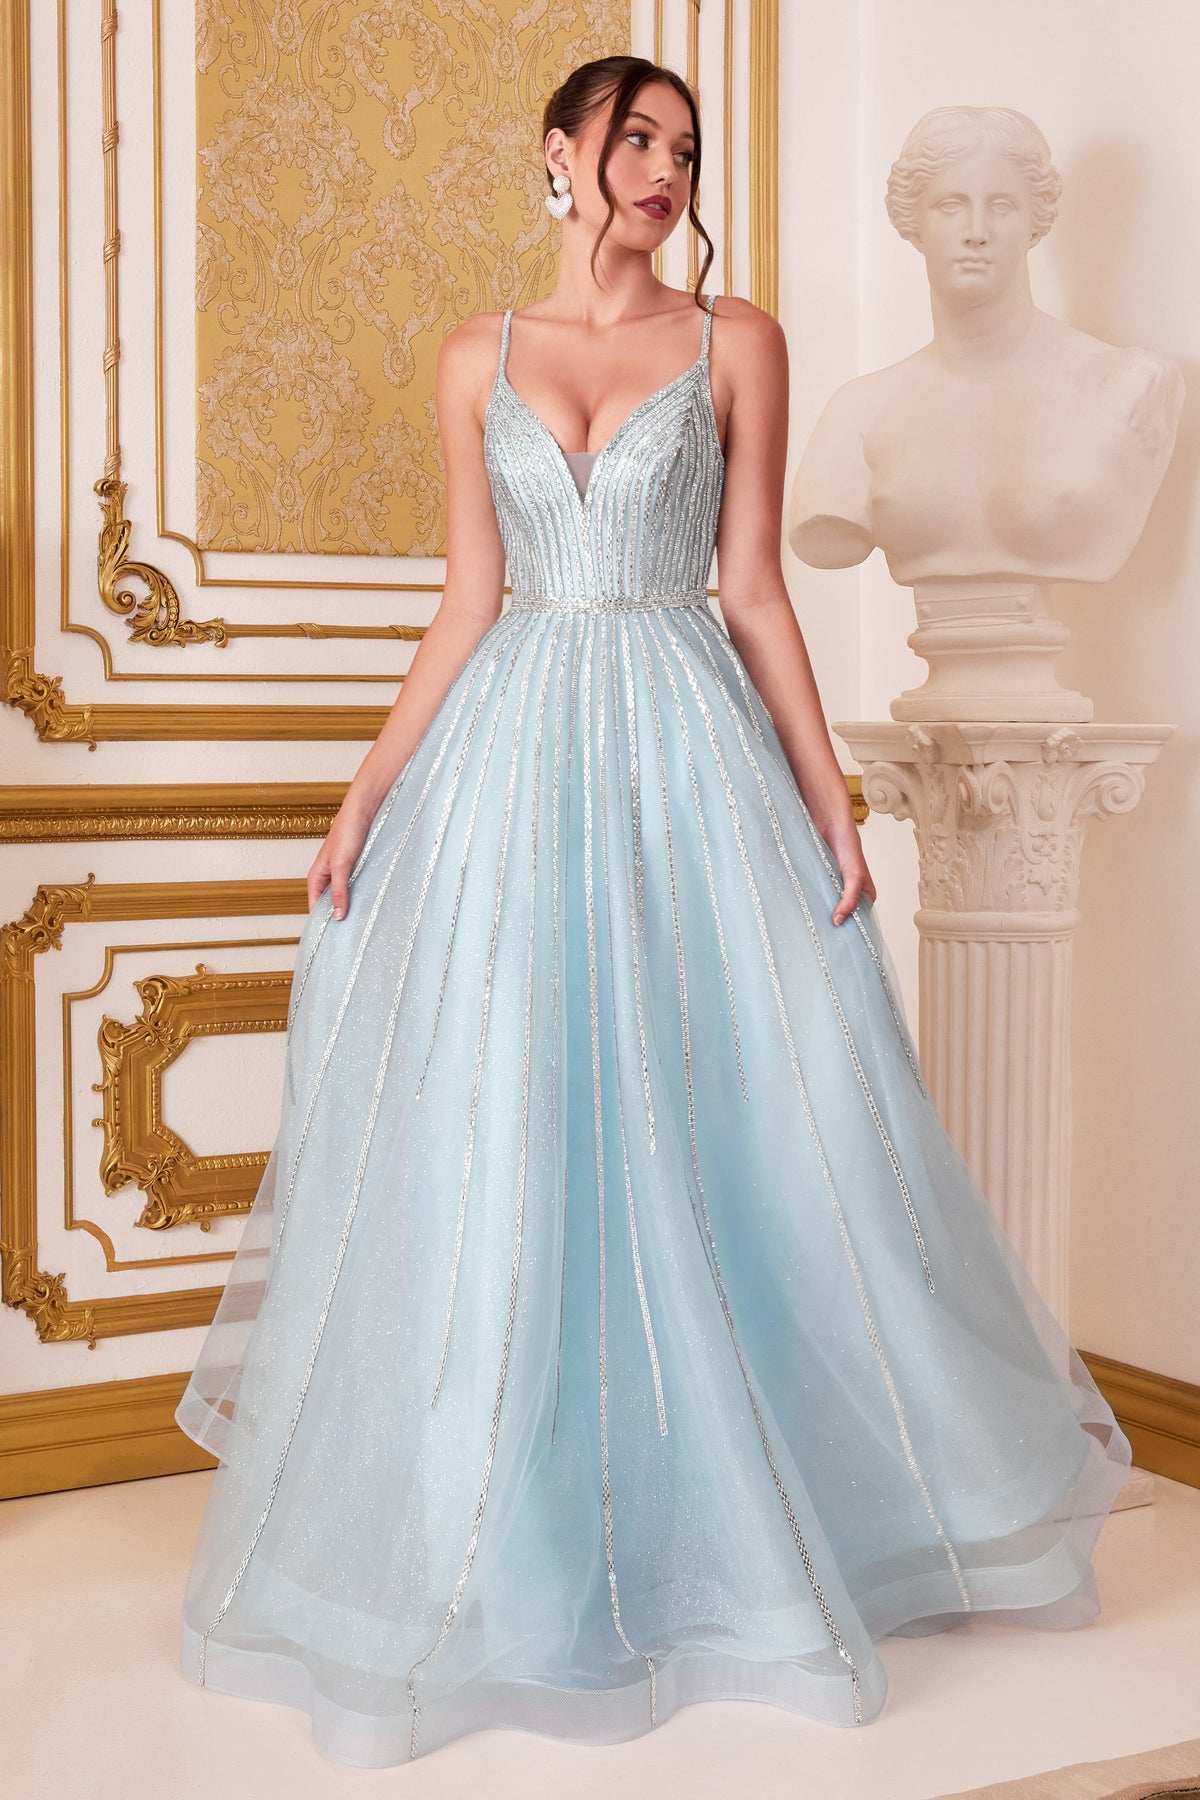 Stunning Corset Top Gown with Fitted Bodice and Fabric Sleeves #CDCB093